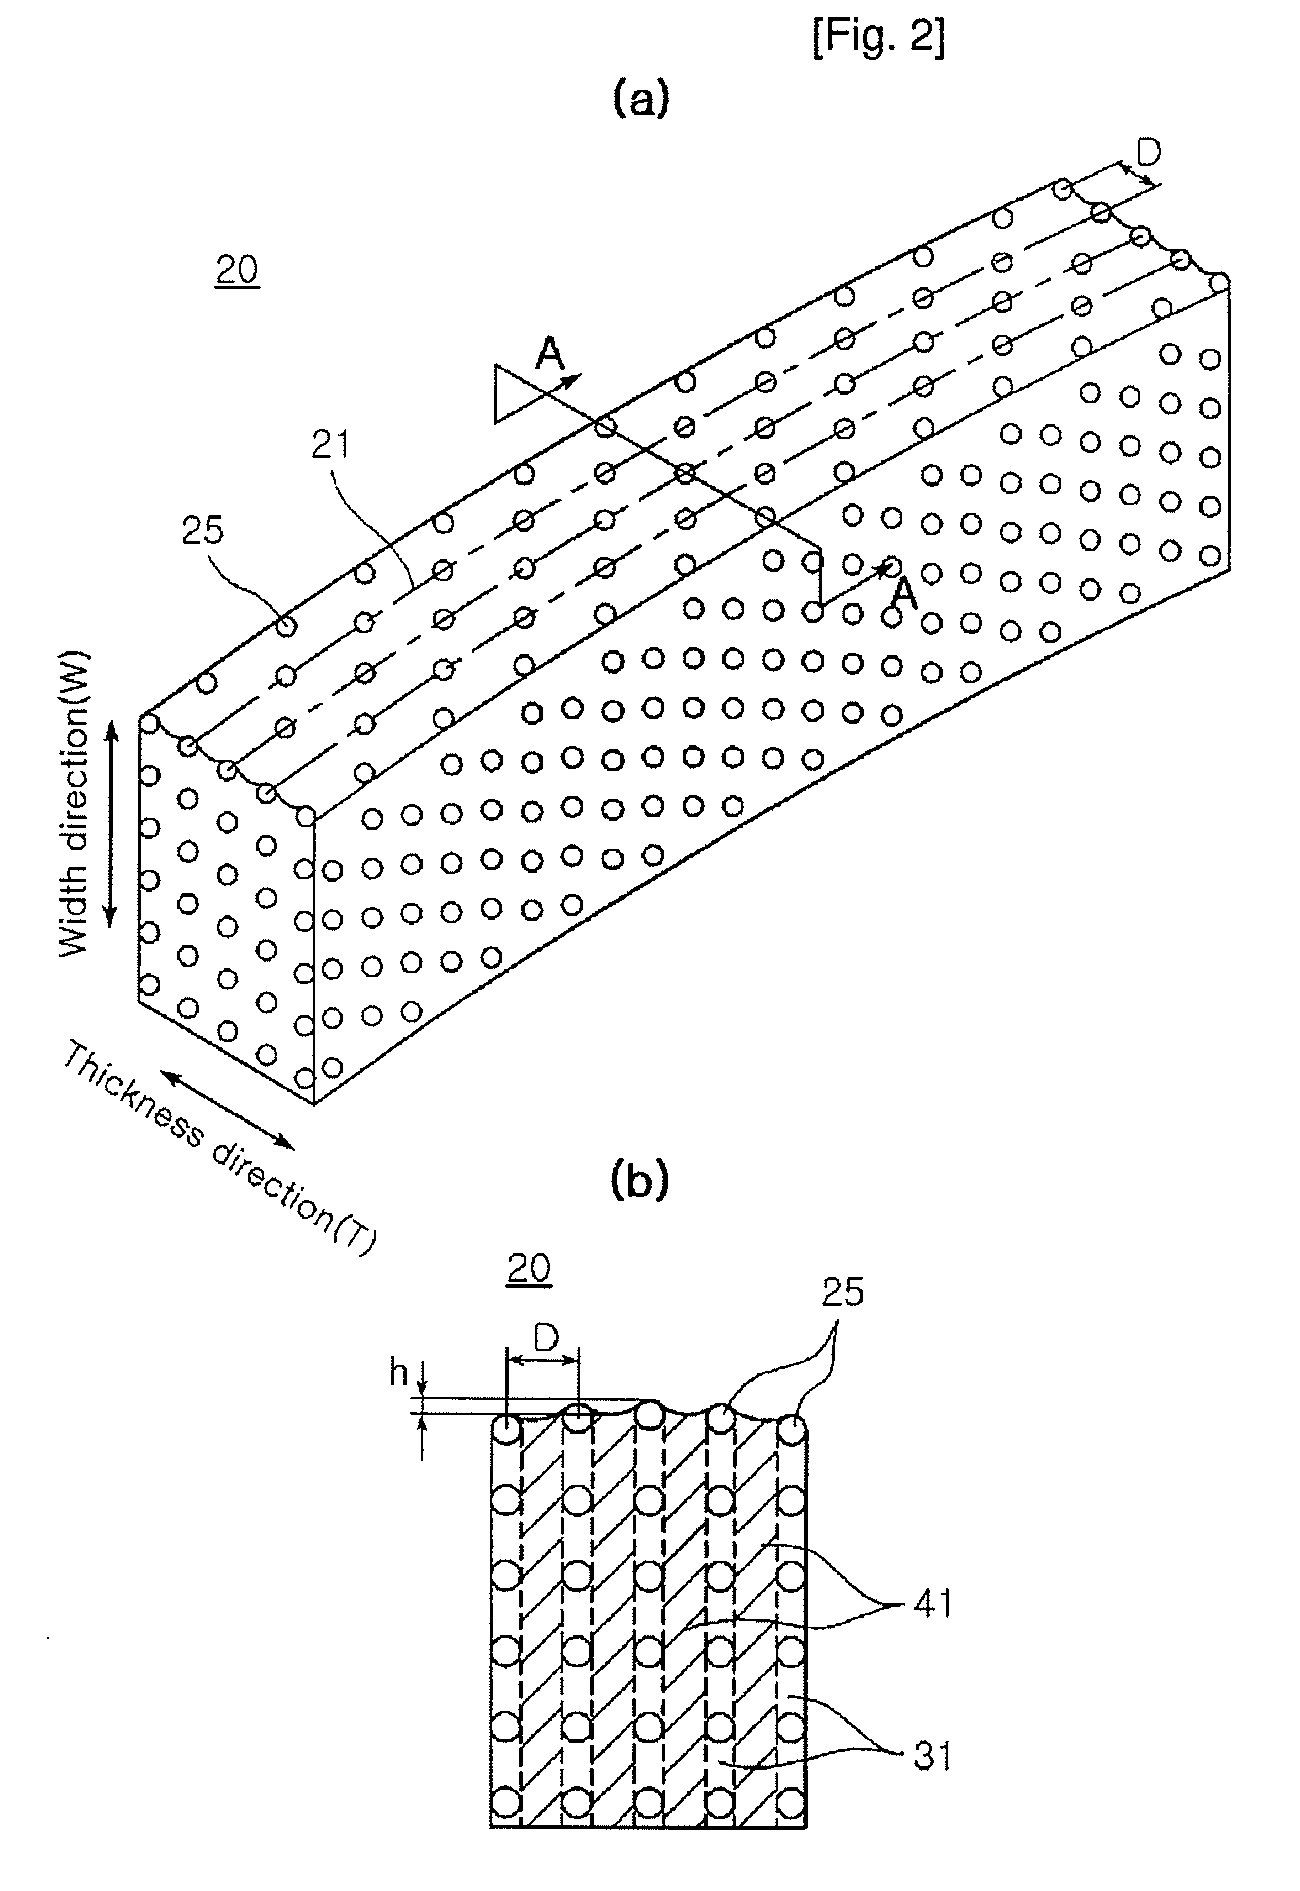 Cutting segment for cutting tool and cutting tools